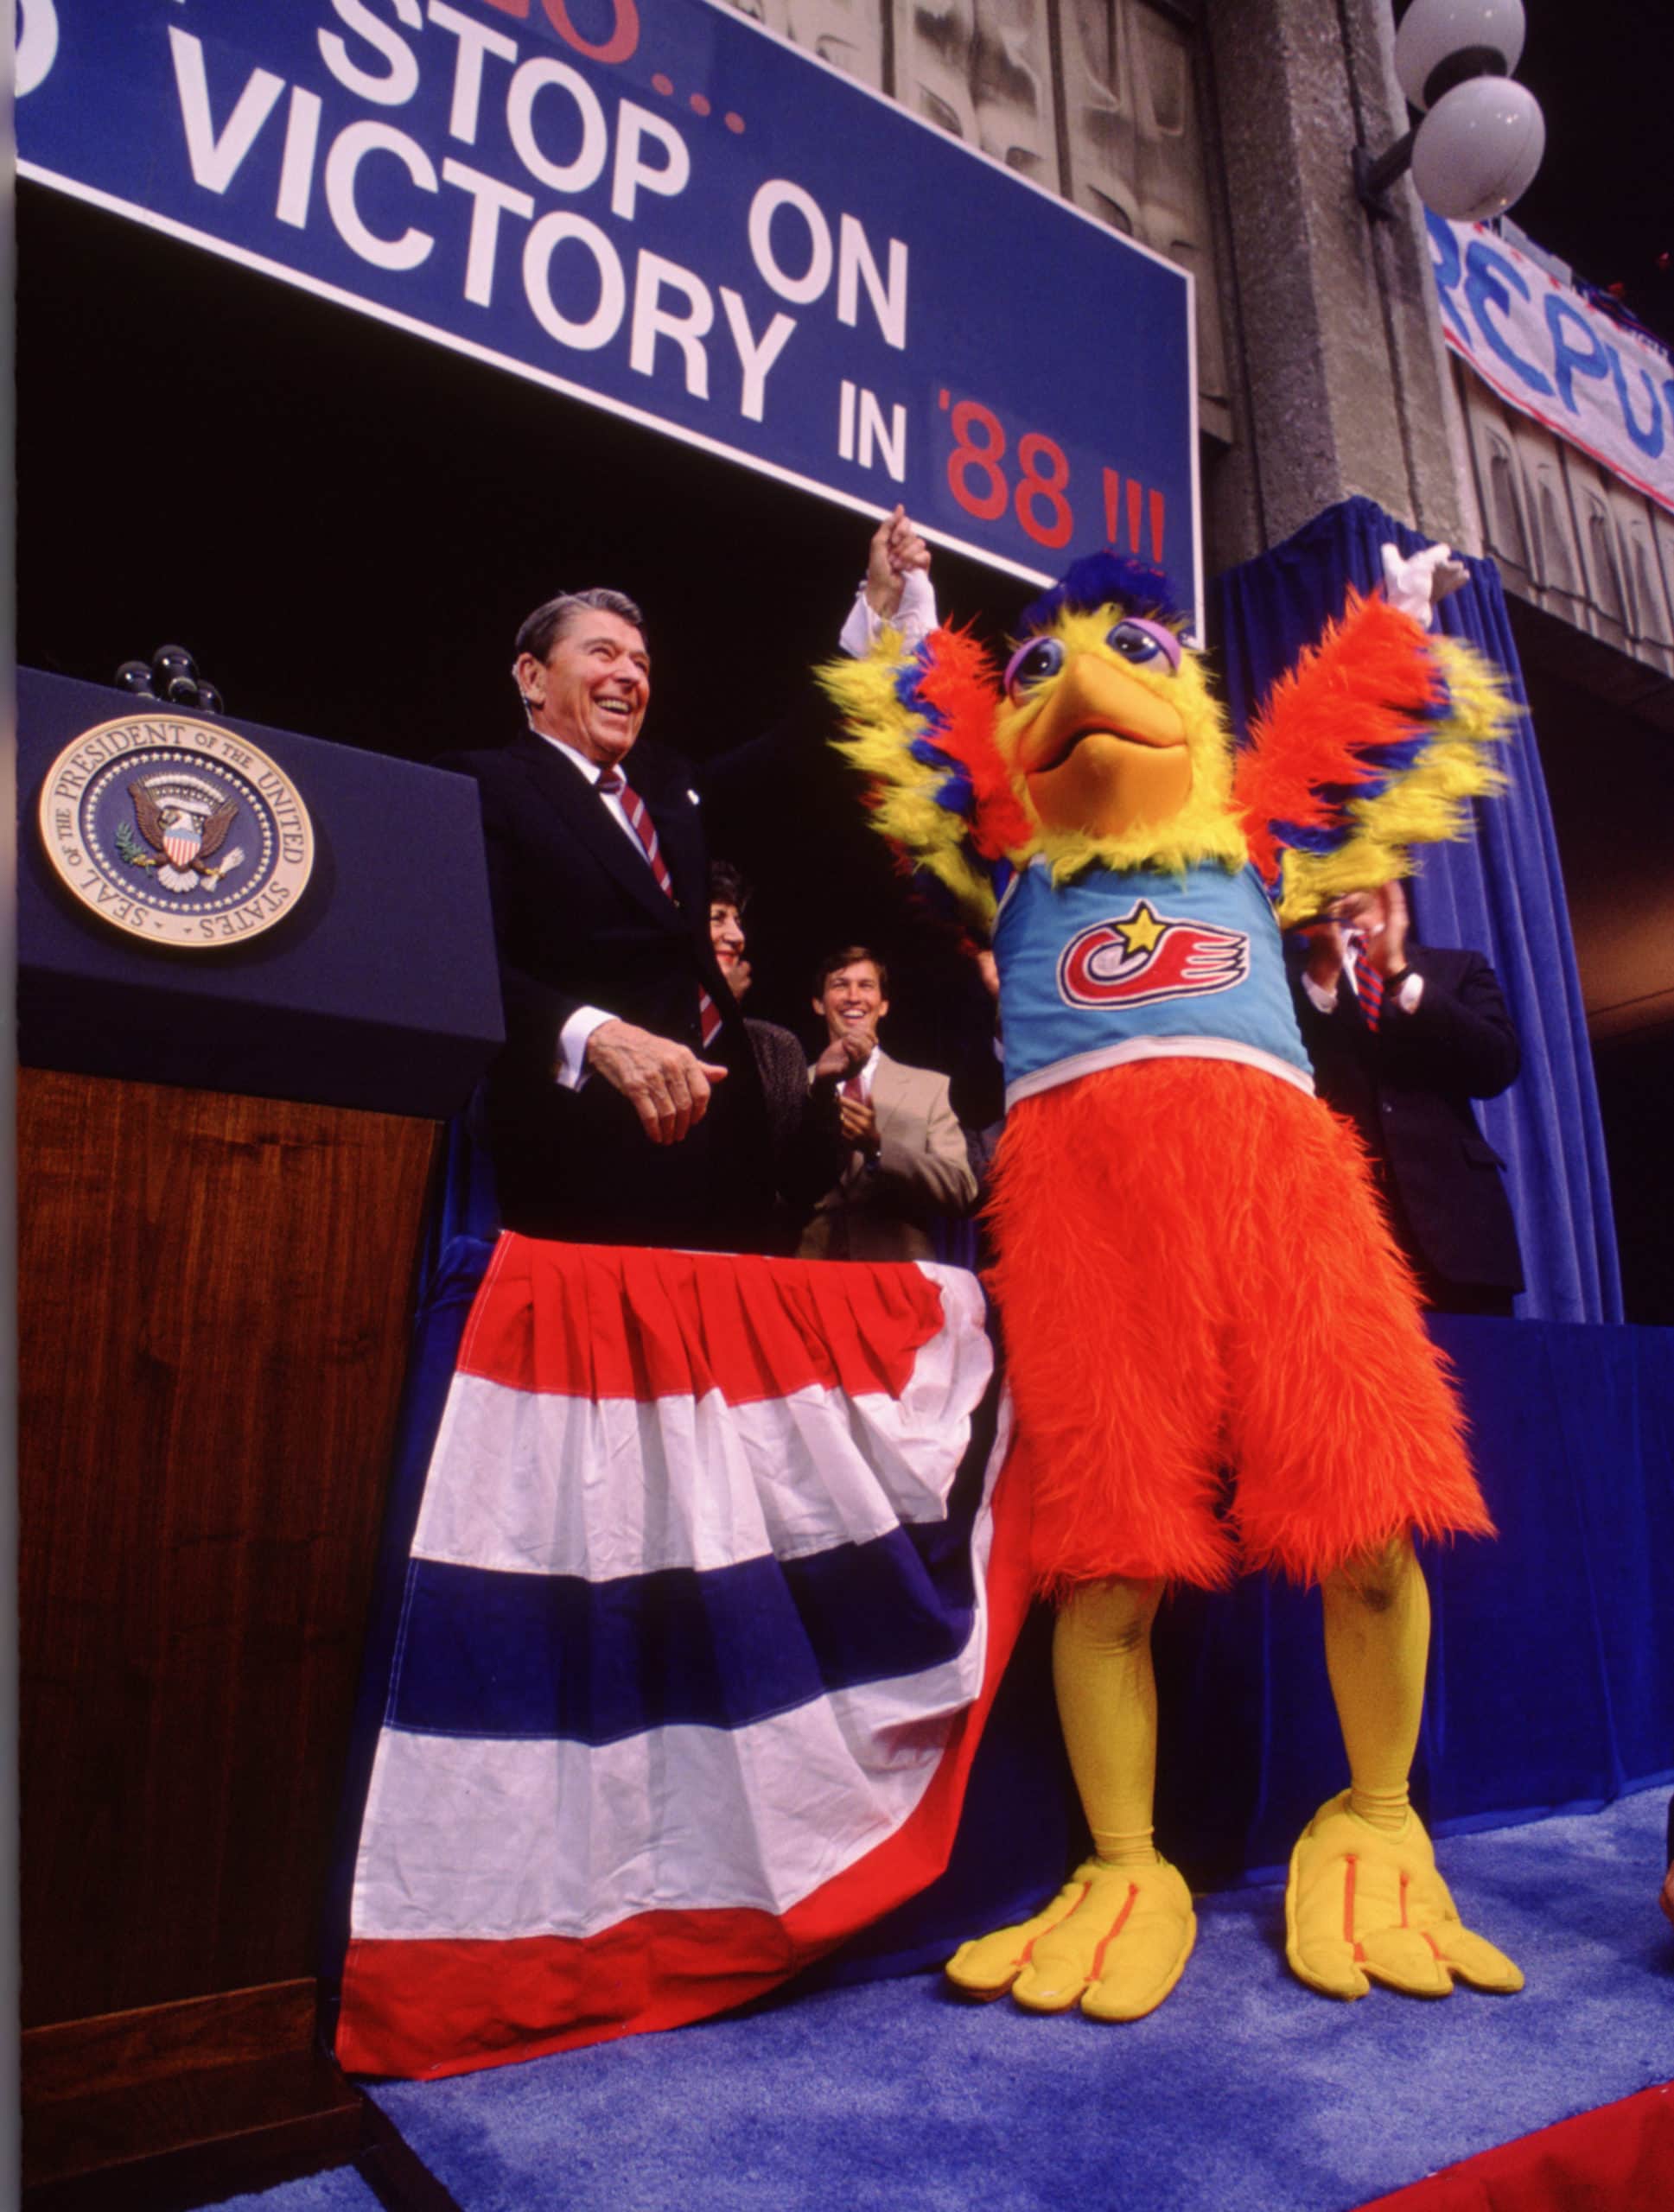 President Ronald Reagan campaigns for his Vice President George Bush at a rally that featured the San Diego Chicken, San Diego, California, November 7, 1988.